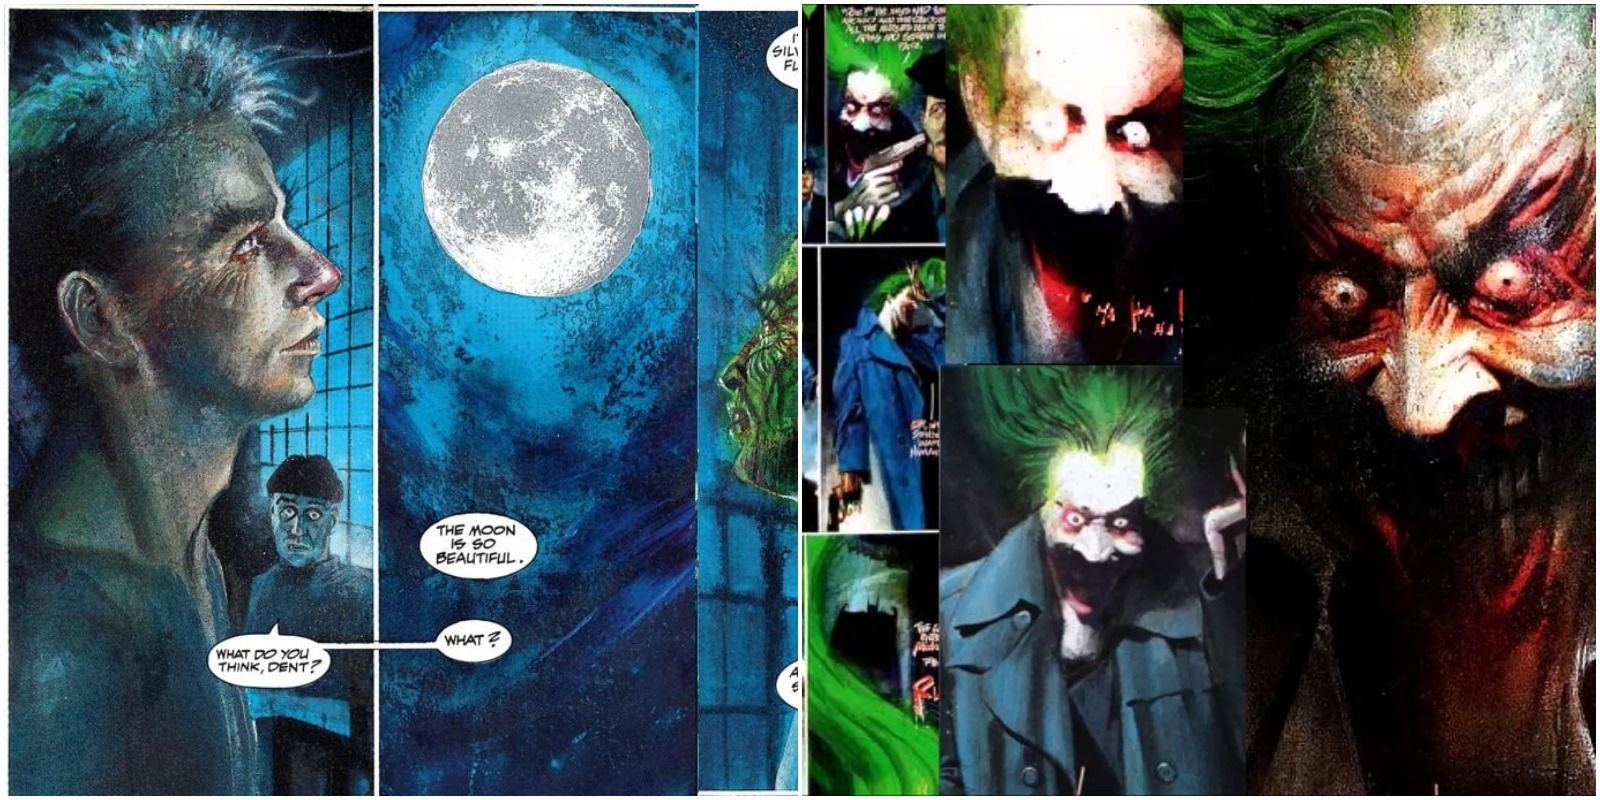 Dave McKean's art style with Joker and Two-Face in Arkham Asylum